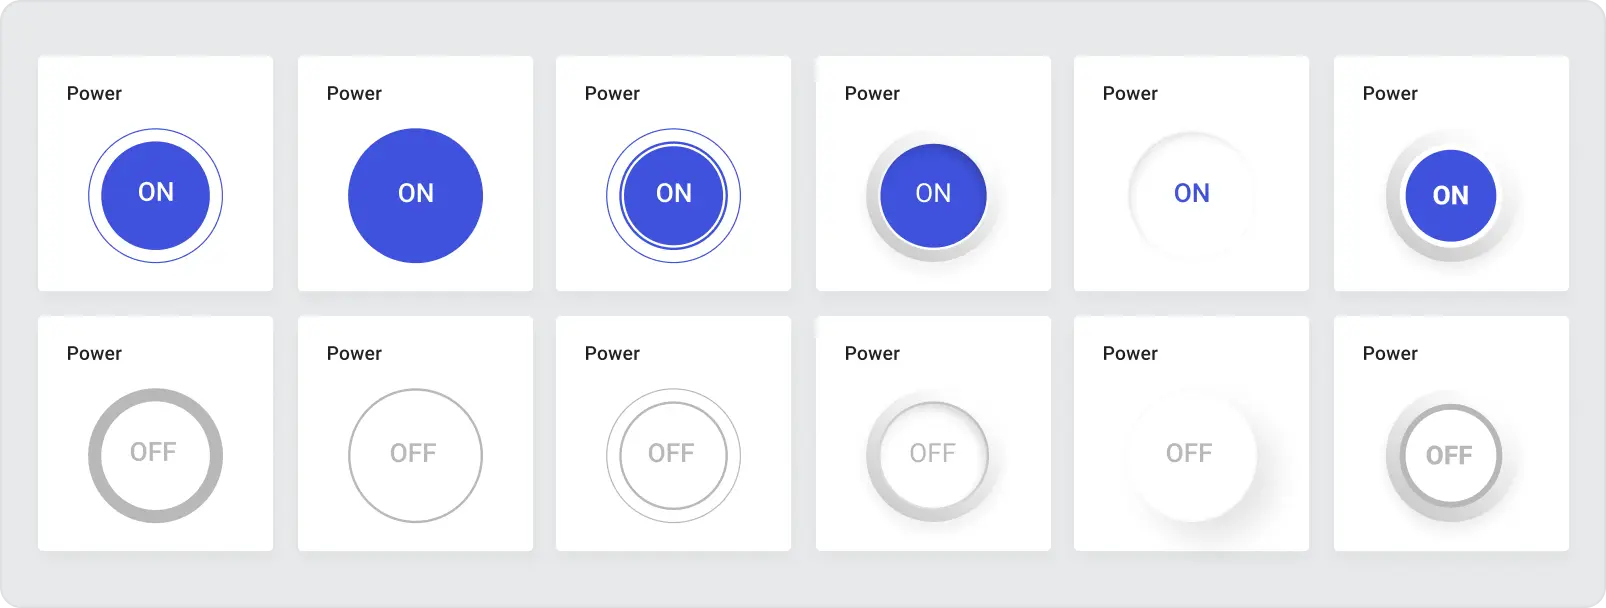 Grid with power buttons in on or off state